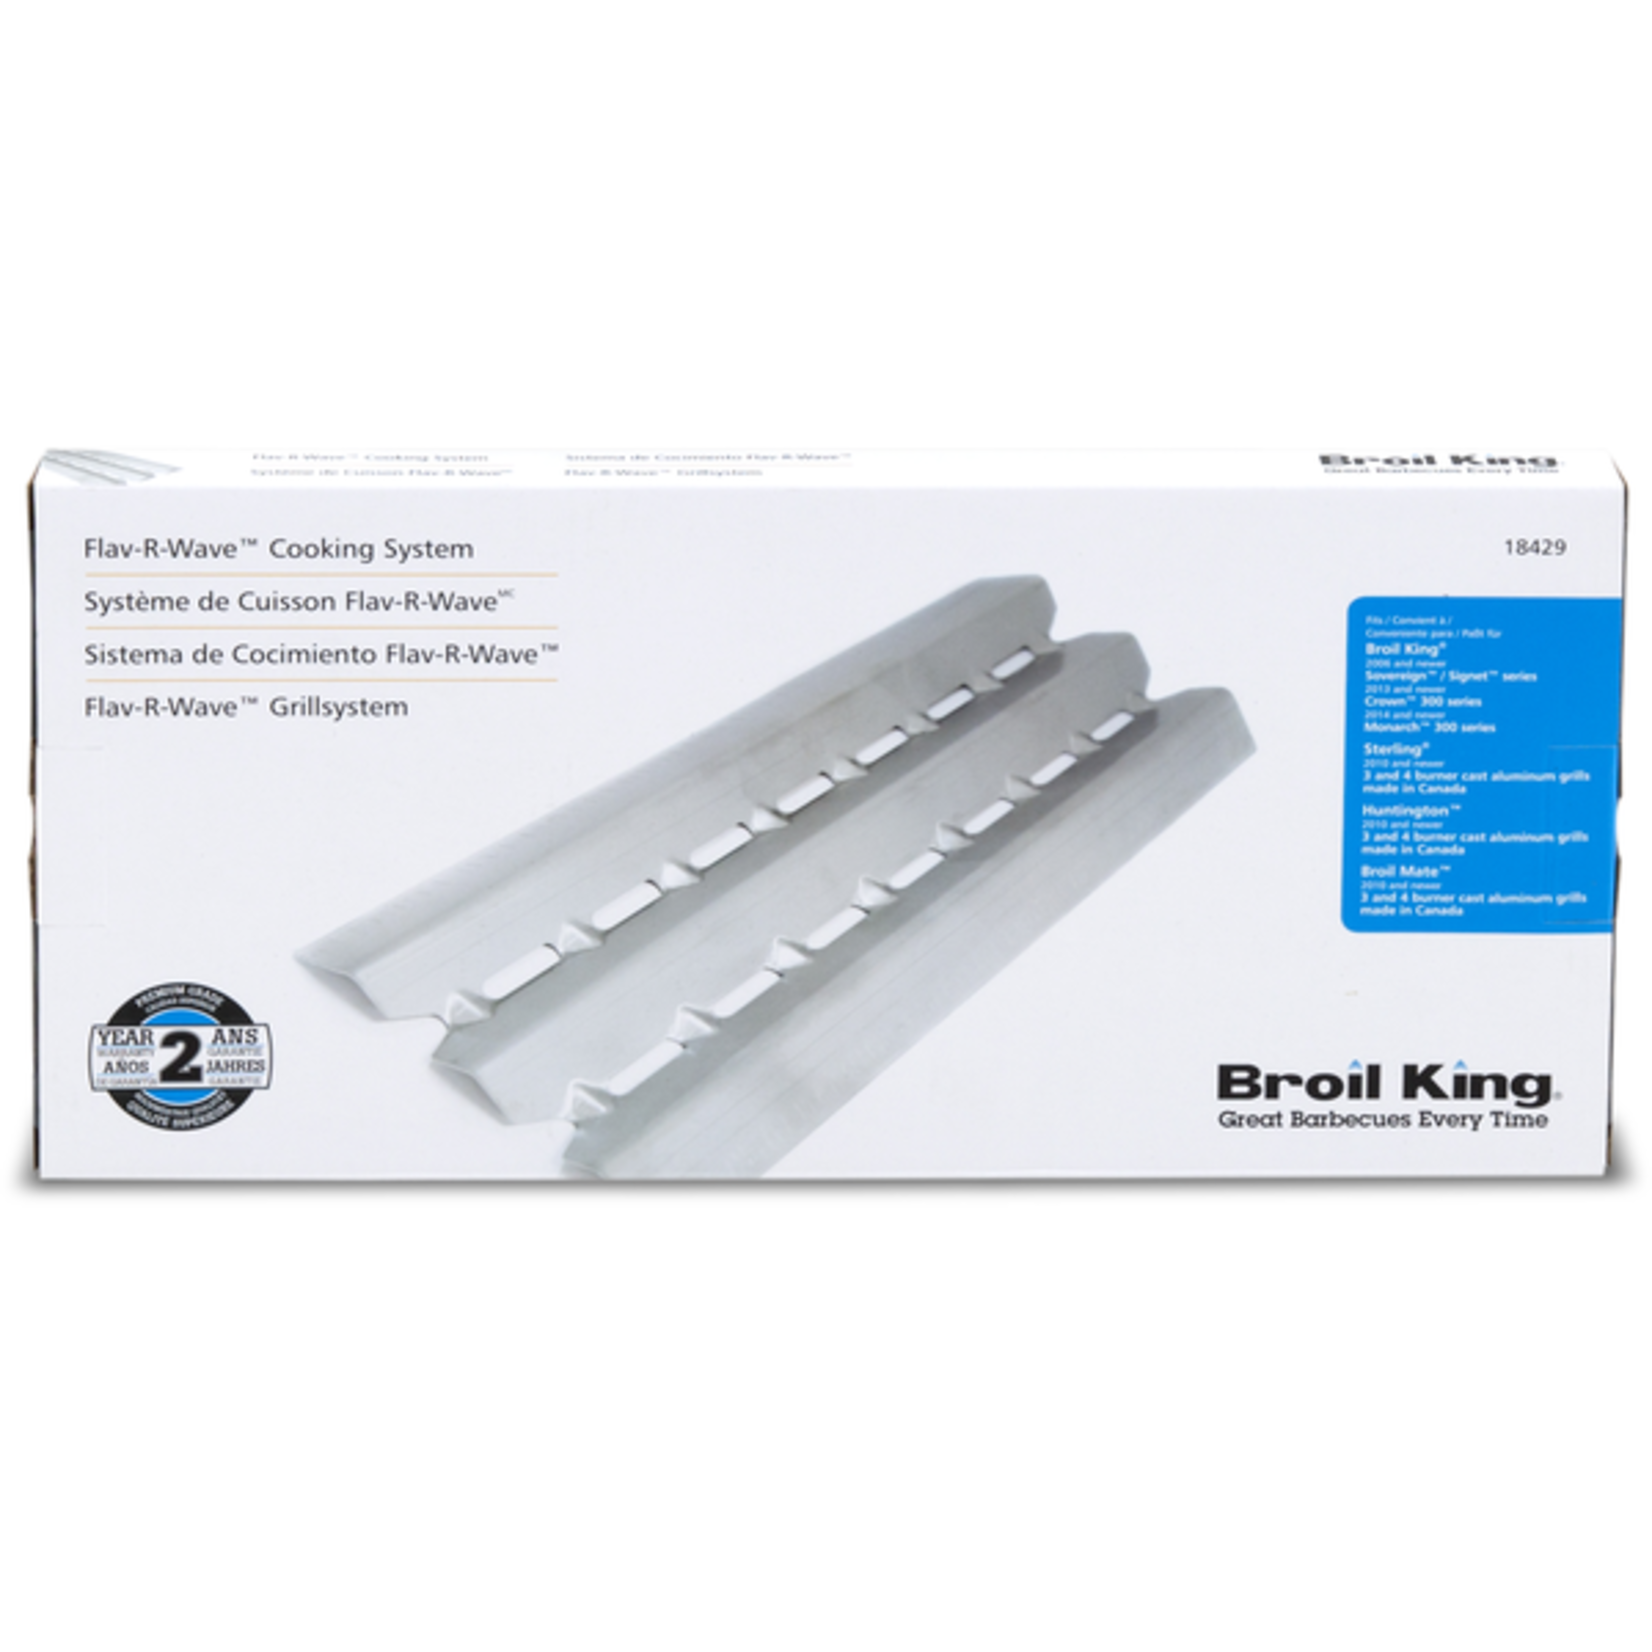 Broil King Flav-R-Wave - Signet/Sovereign - Stainless Steel - 1 Piece